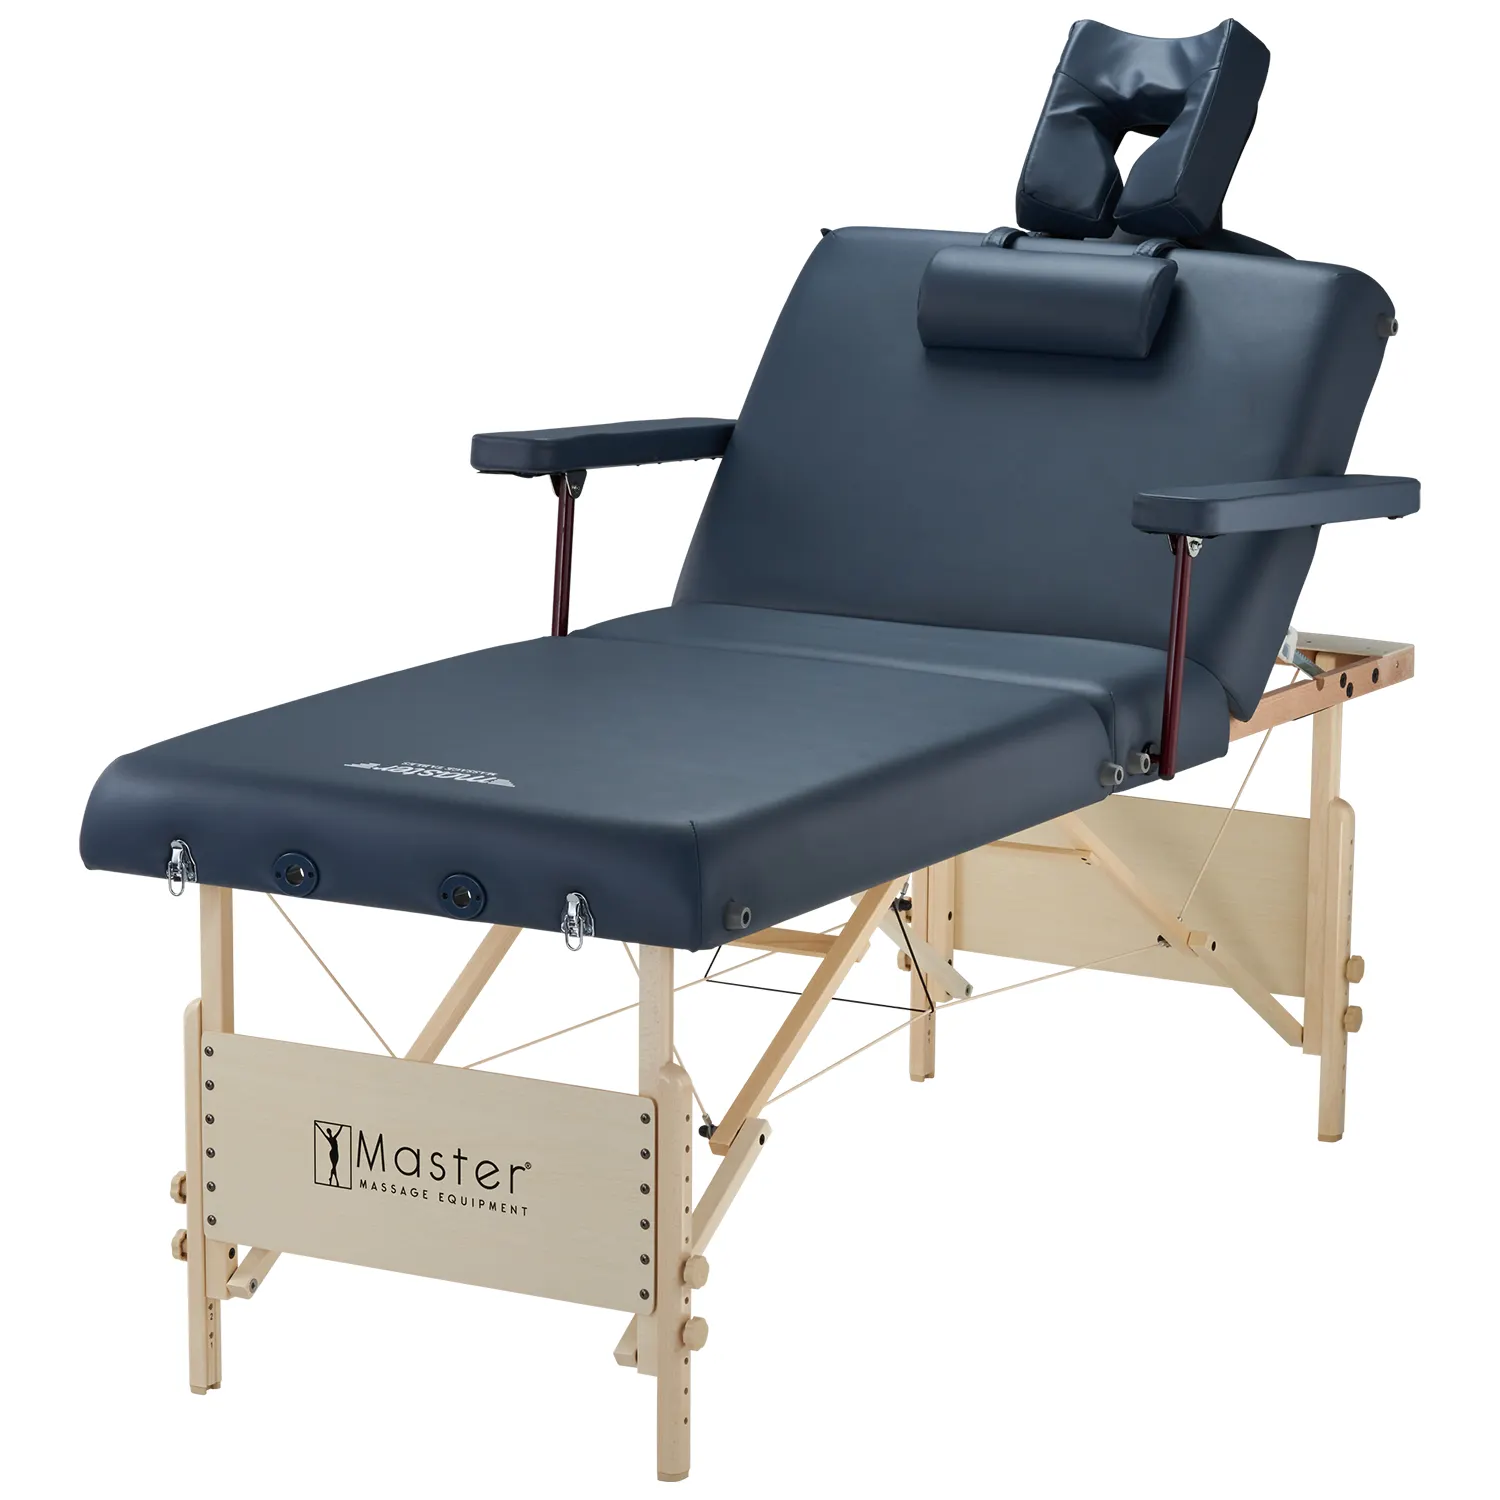 Master 31 ''Breed 3 Sectie Professionele Draagbare Vouwen Stationaire Massage Bed Salon Bed Fysiotherapie Bed Met Rugleuning